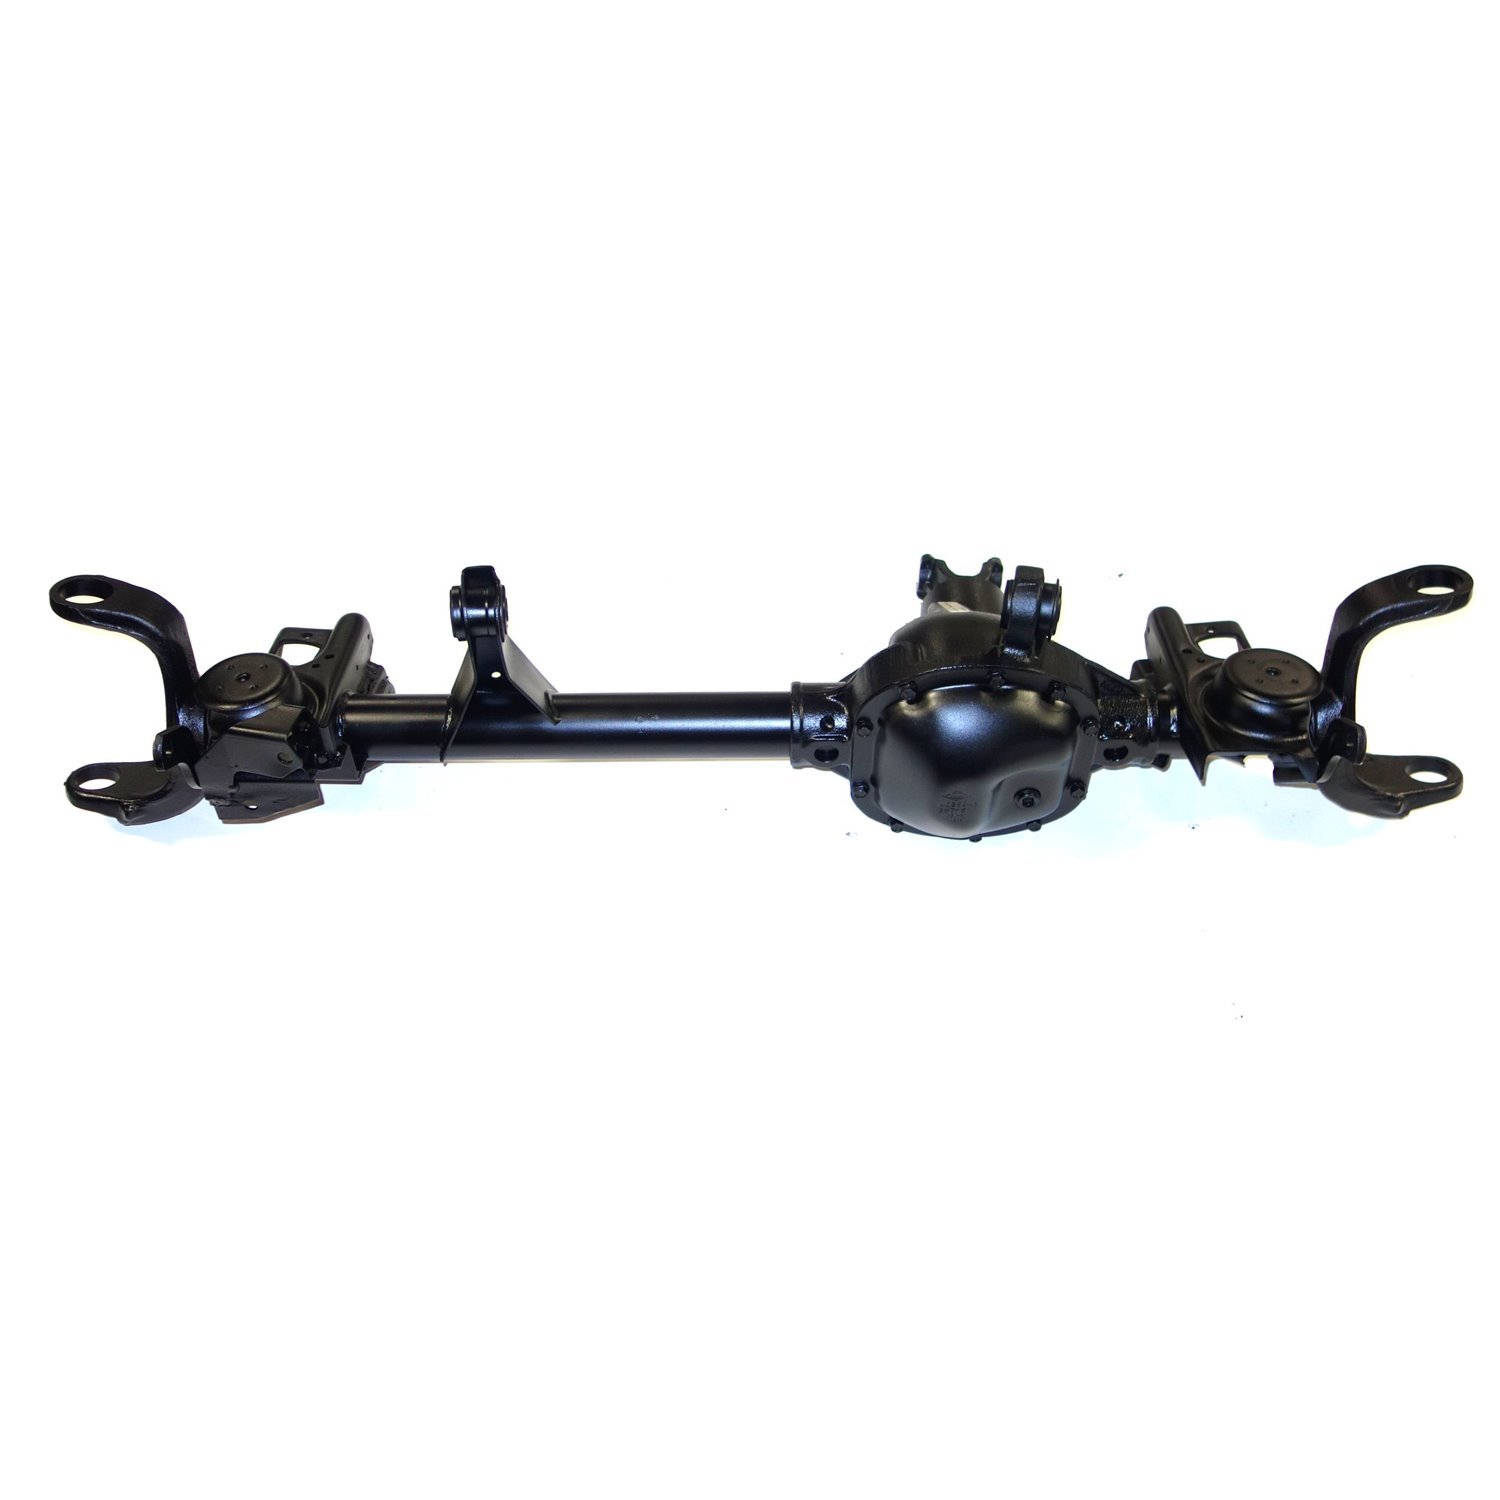 Remanufactured Dana 30 Front Axle Assembly for 2008 & 2011-2015 Jeep Wrangler LHD, 3.73 Ratio